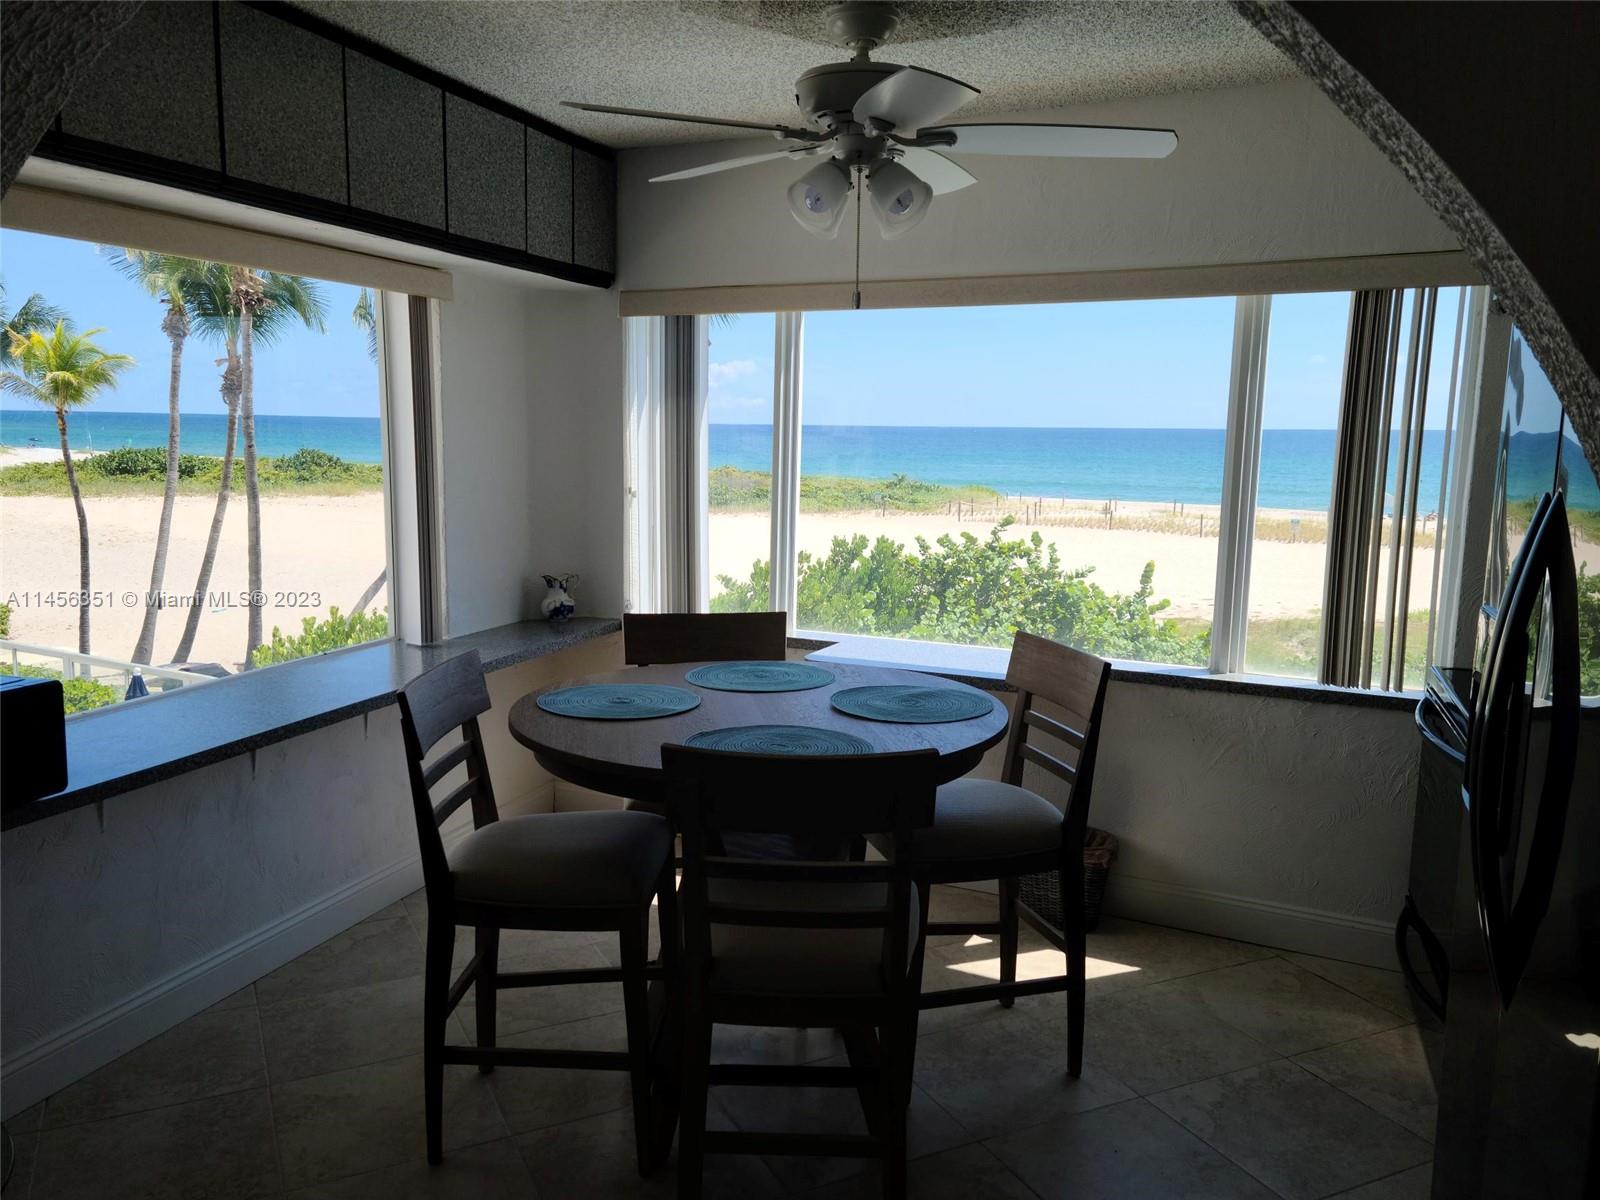 3401 NE 10th St Unit 5, Pompano Beach, Florida, 33062, United States, 1 Bedroom Bedrooms, ,1 BathroomBathrooms,Residential,For Sale,3401 NE 10th St Unit 5,1337555